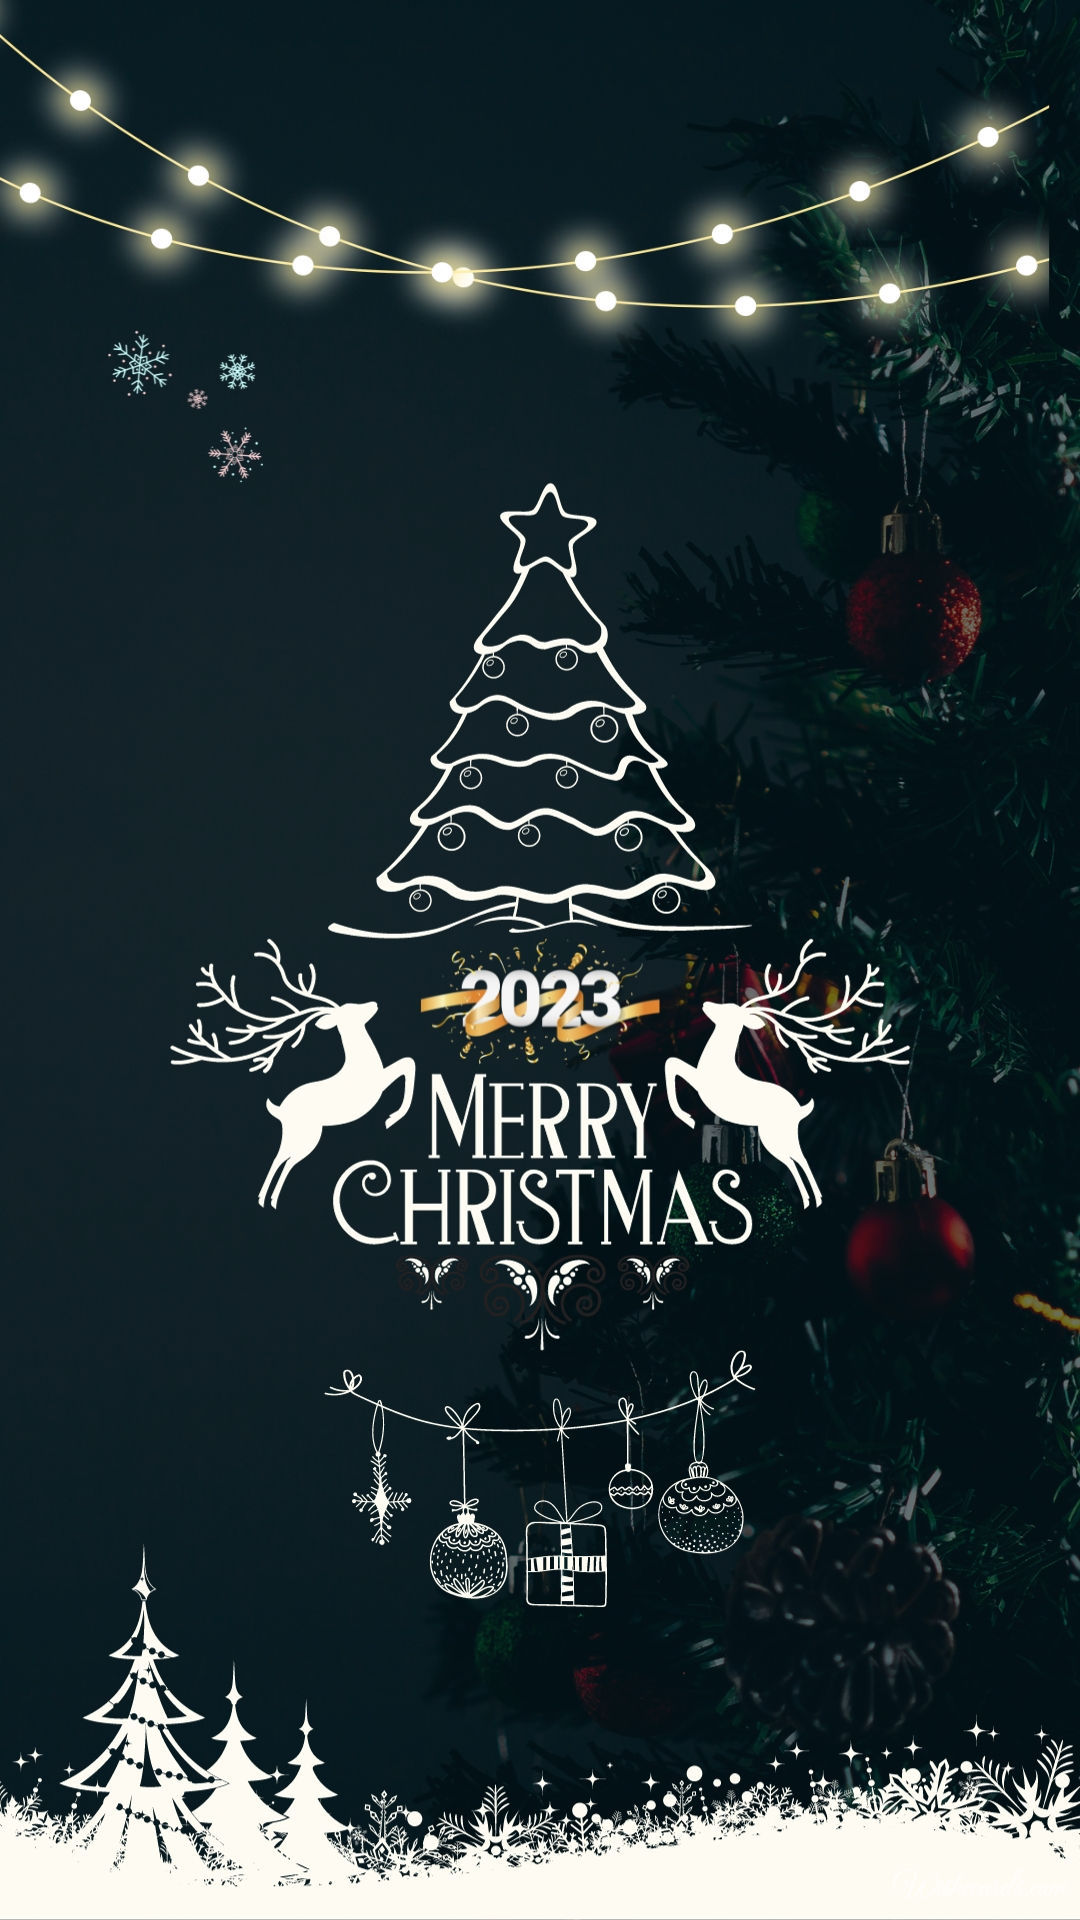 Merry Christmas 2023 Picture